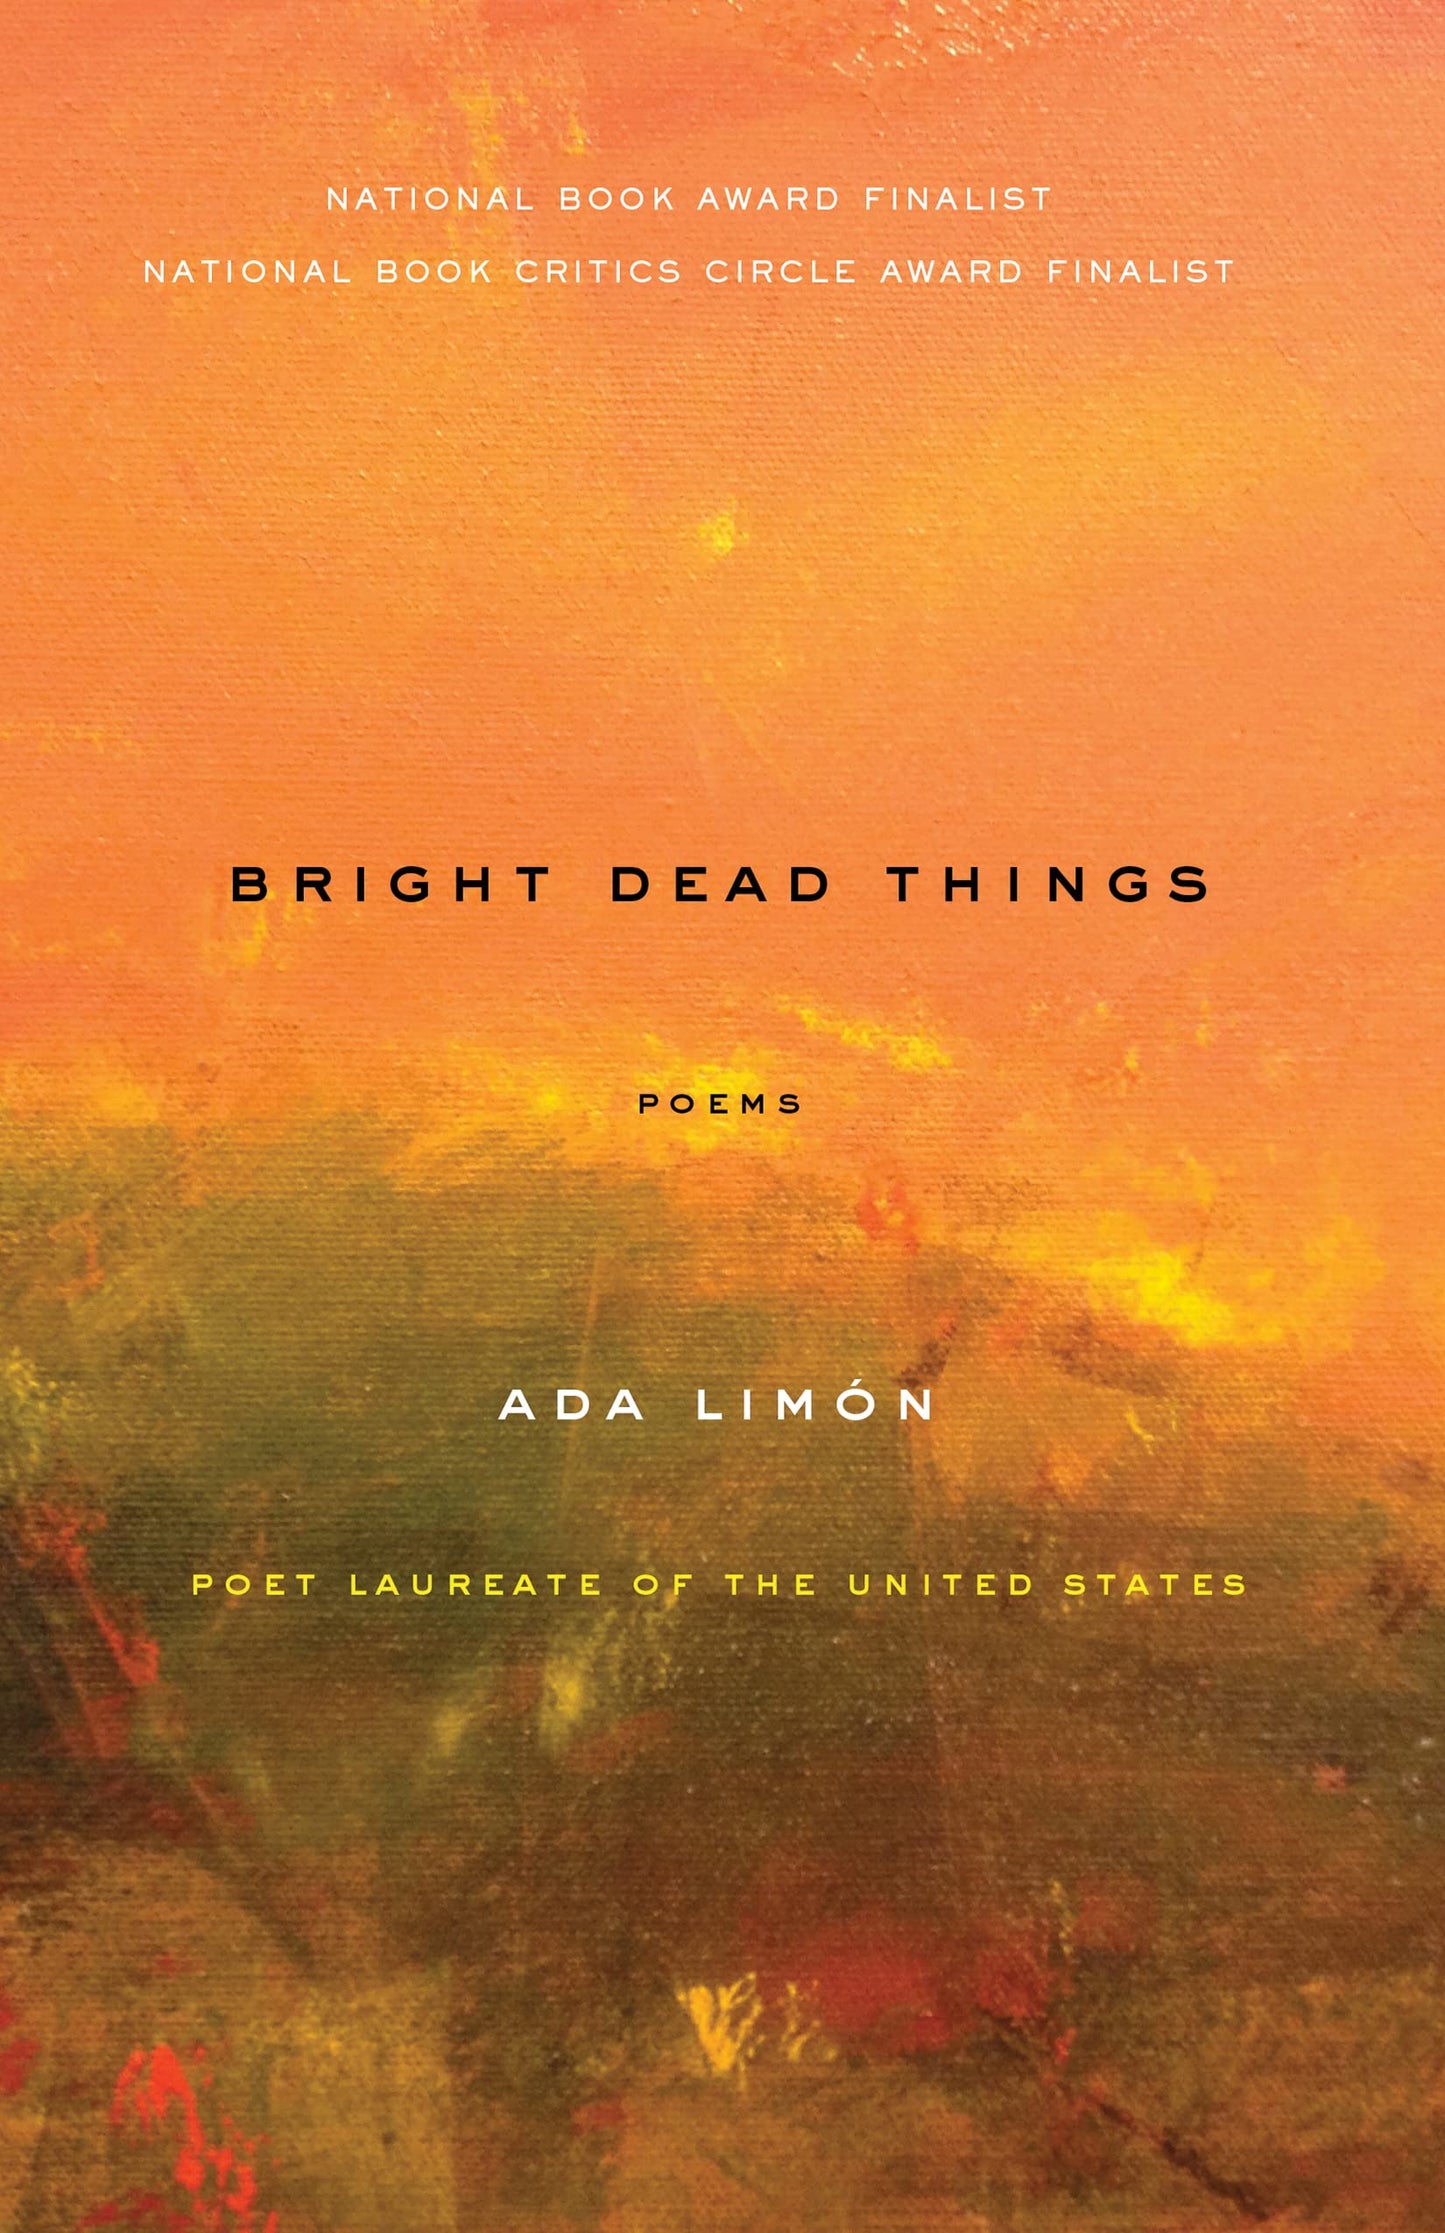 Bright Dead Things, by Ada Limón